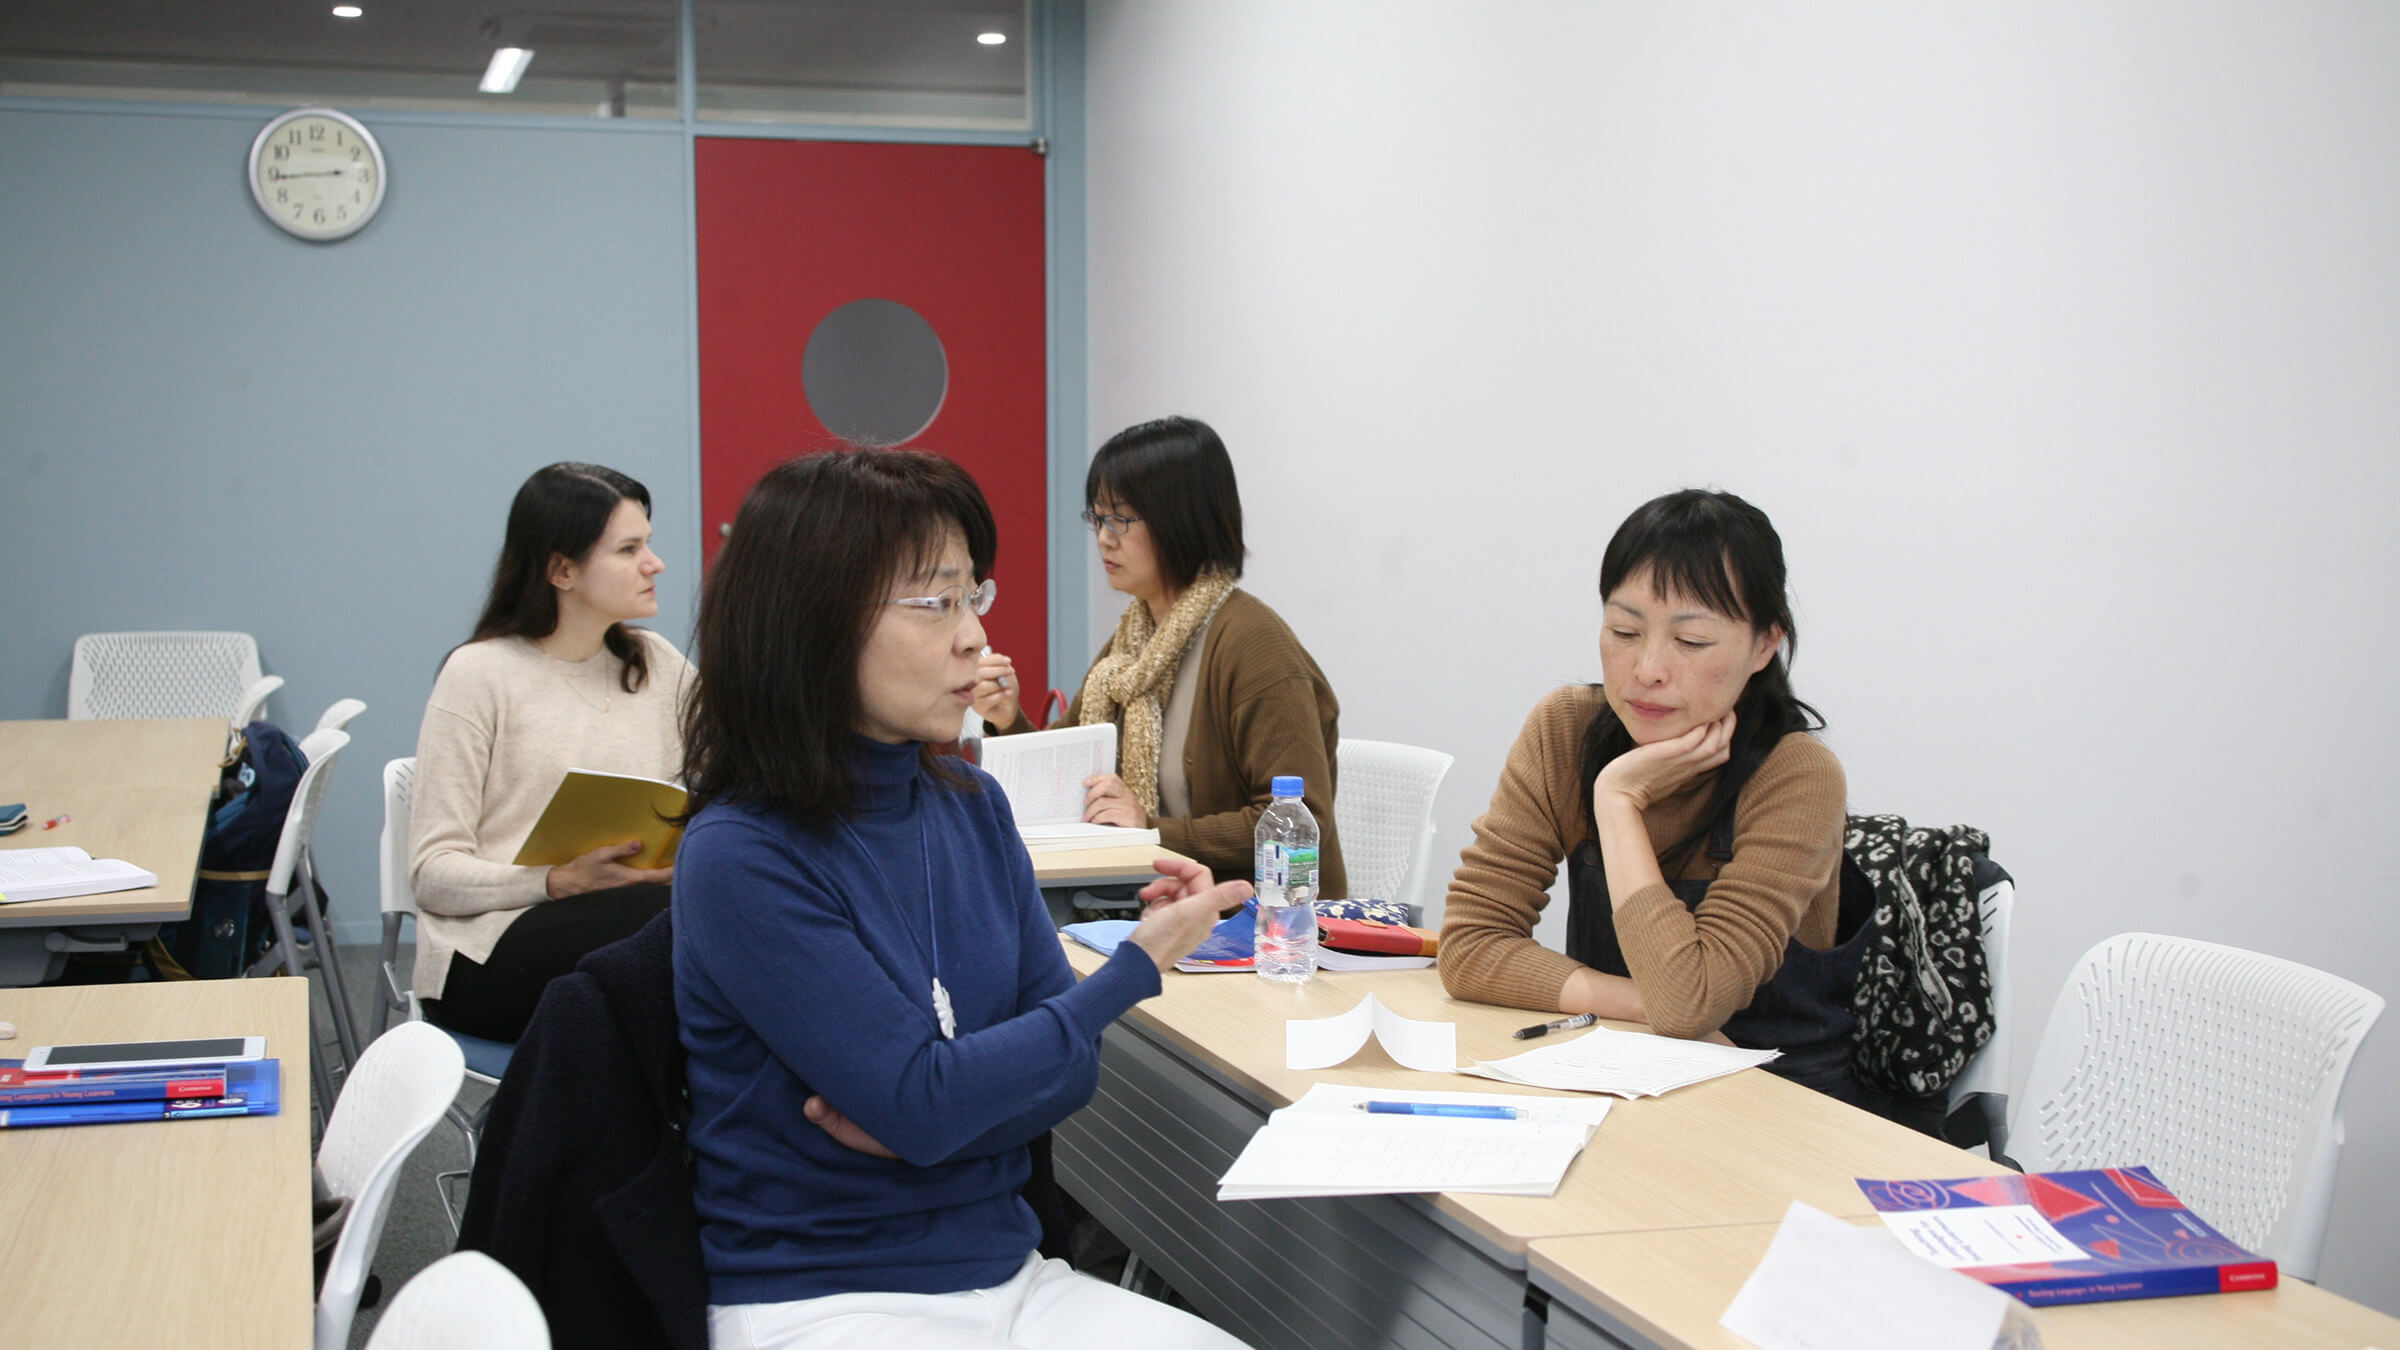 Students hold discussions in a continuing education course at TUJ's campus in Tokyo.